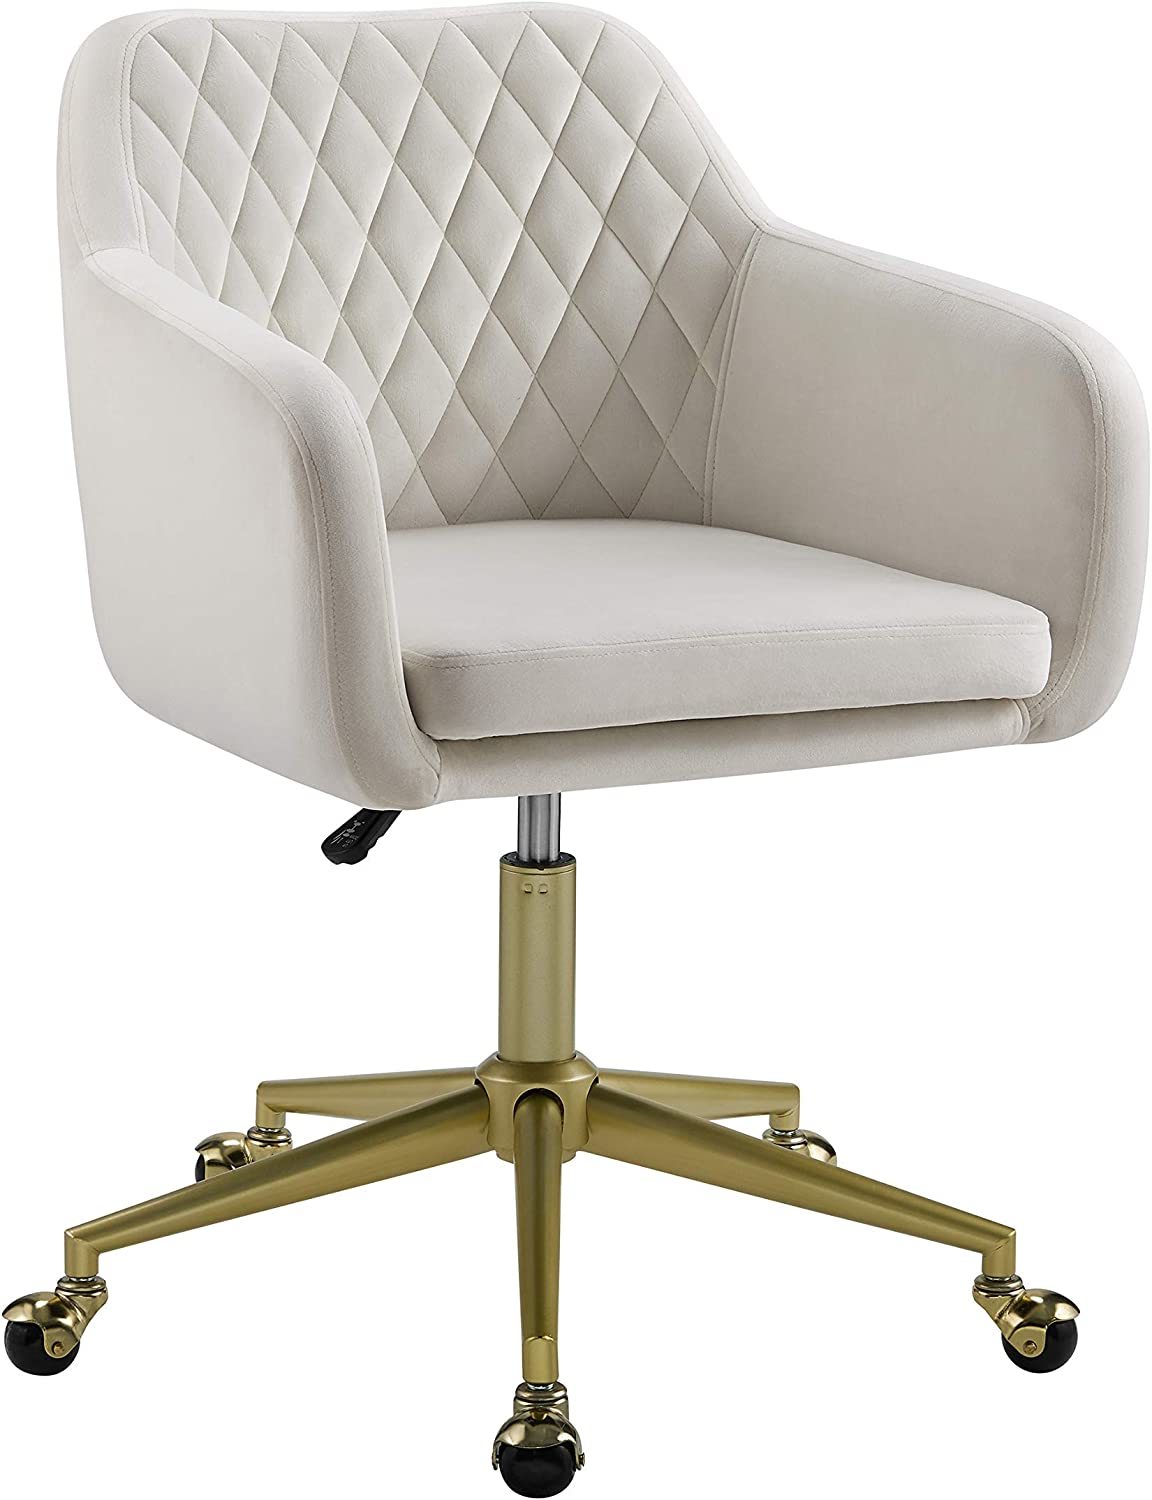 Brooklyn Office Chair In White With Quilting By Linon. - $227.94